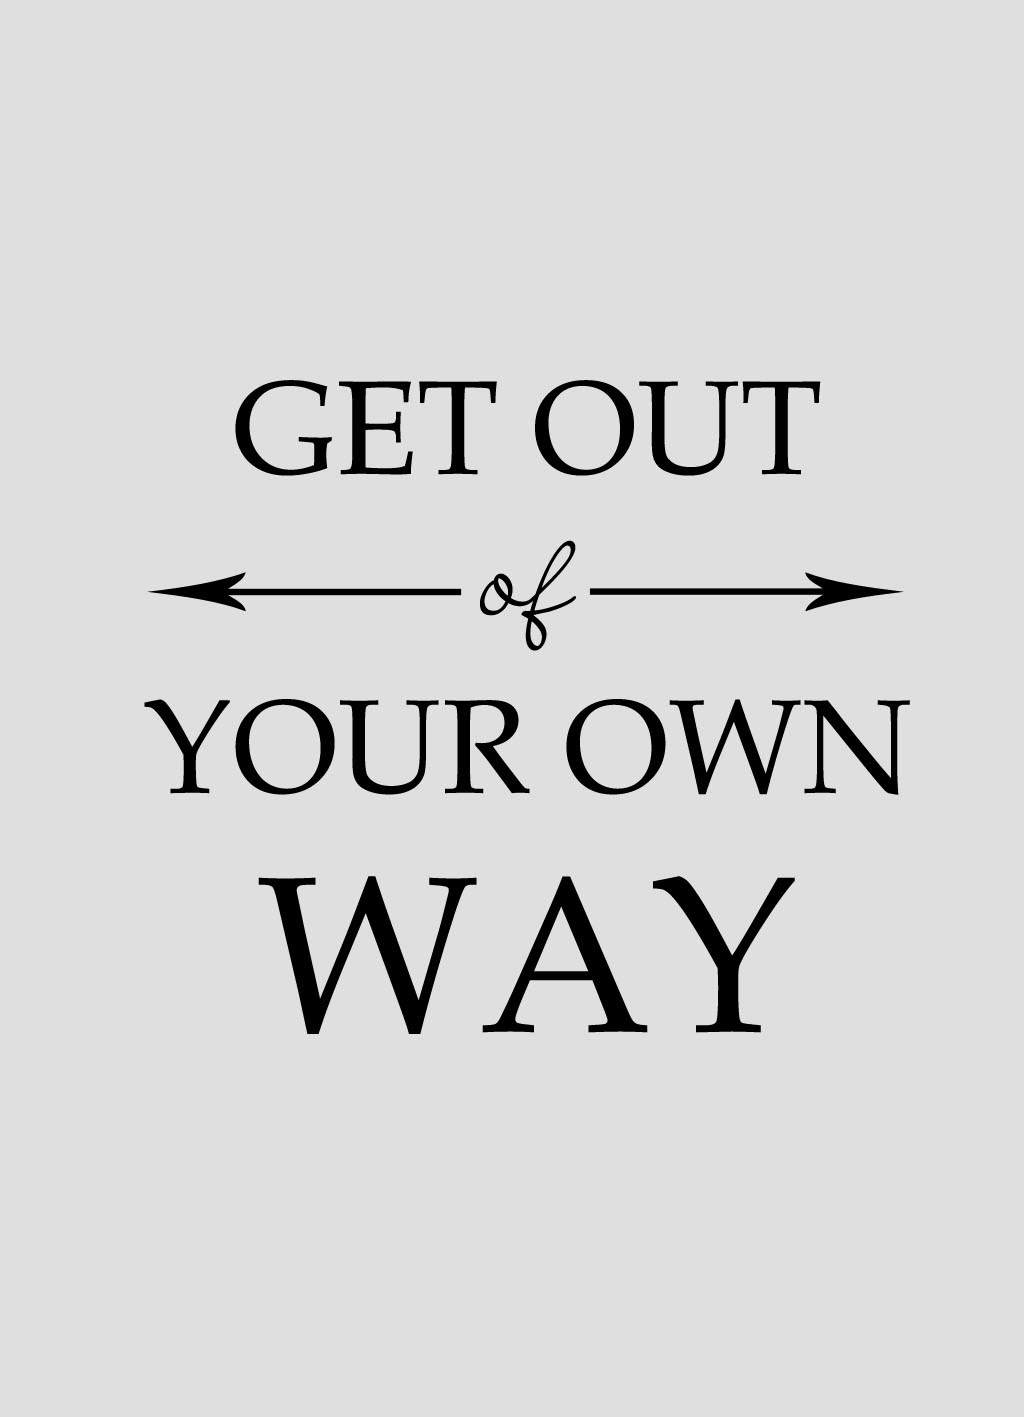 Quote of the Day: Get out of your own way